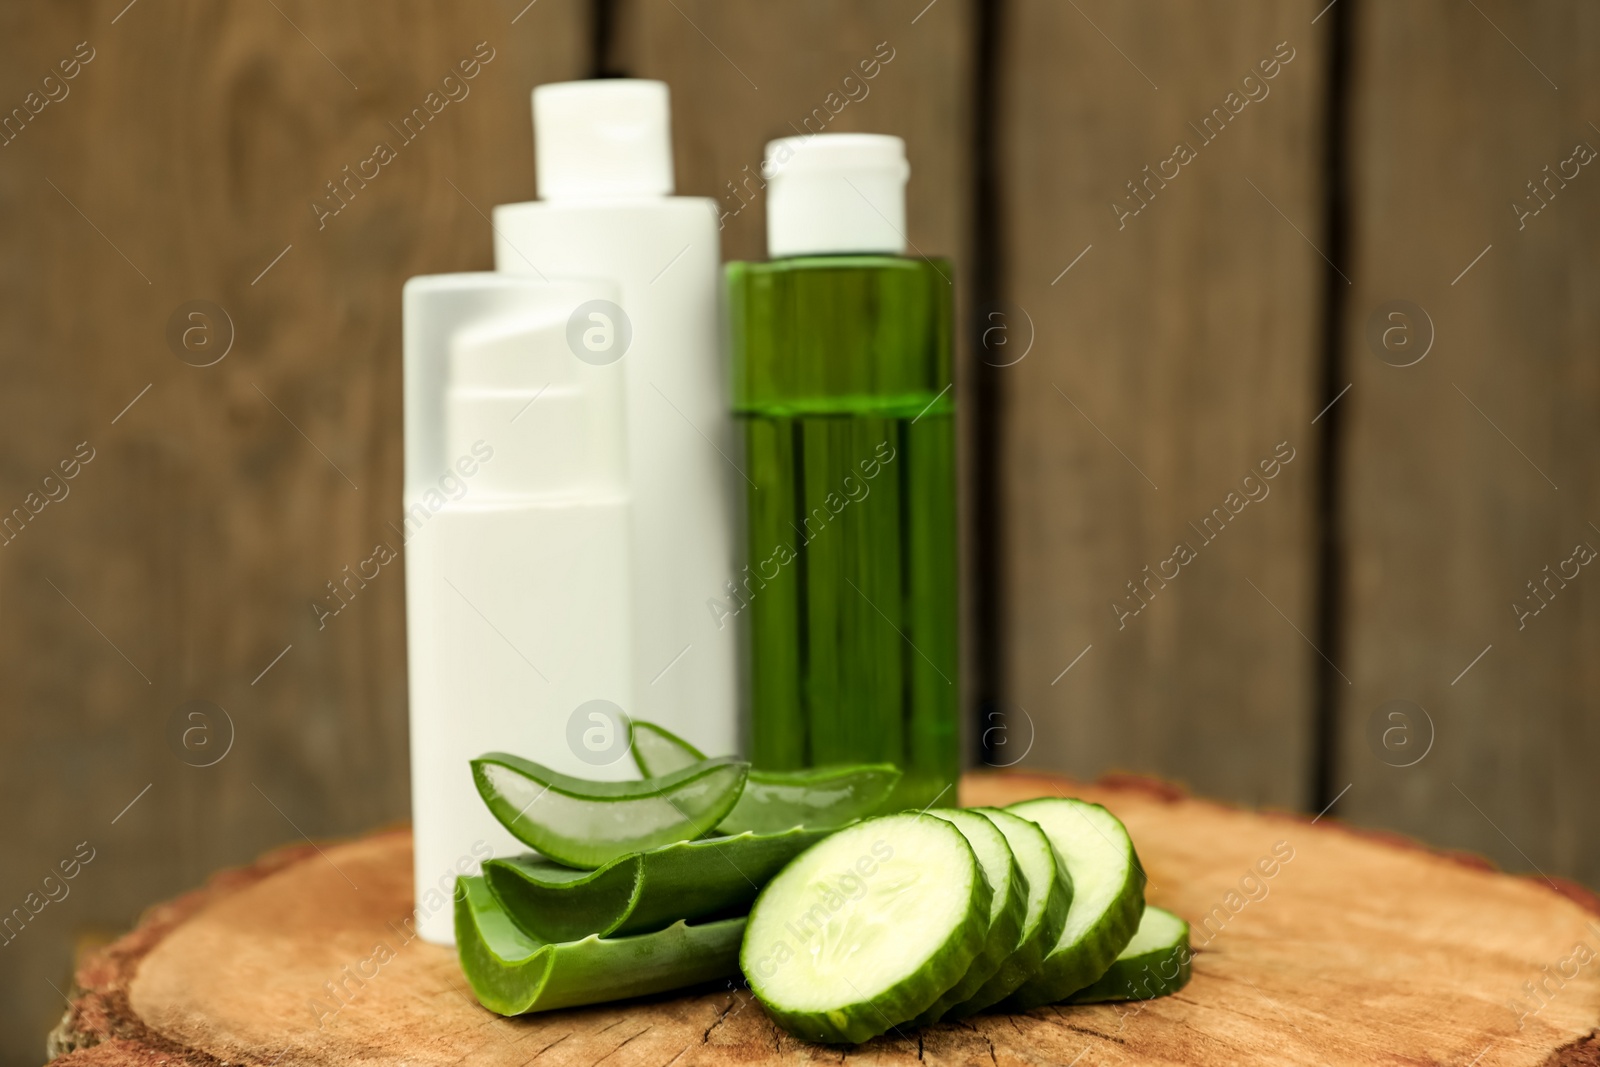 Photo of Bottles of cosmetic products, sliced aloe vera leaves and cucumber on wooden stump